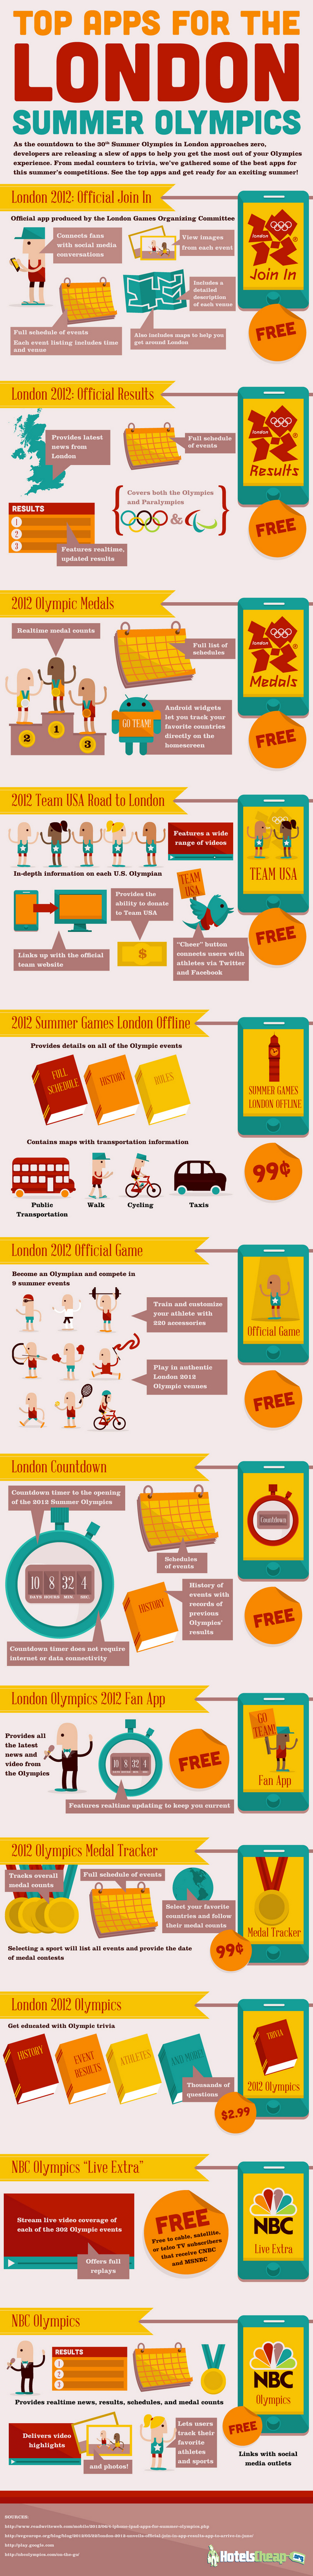 Top Apps for the London Summer Olympics